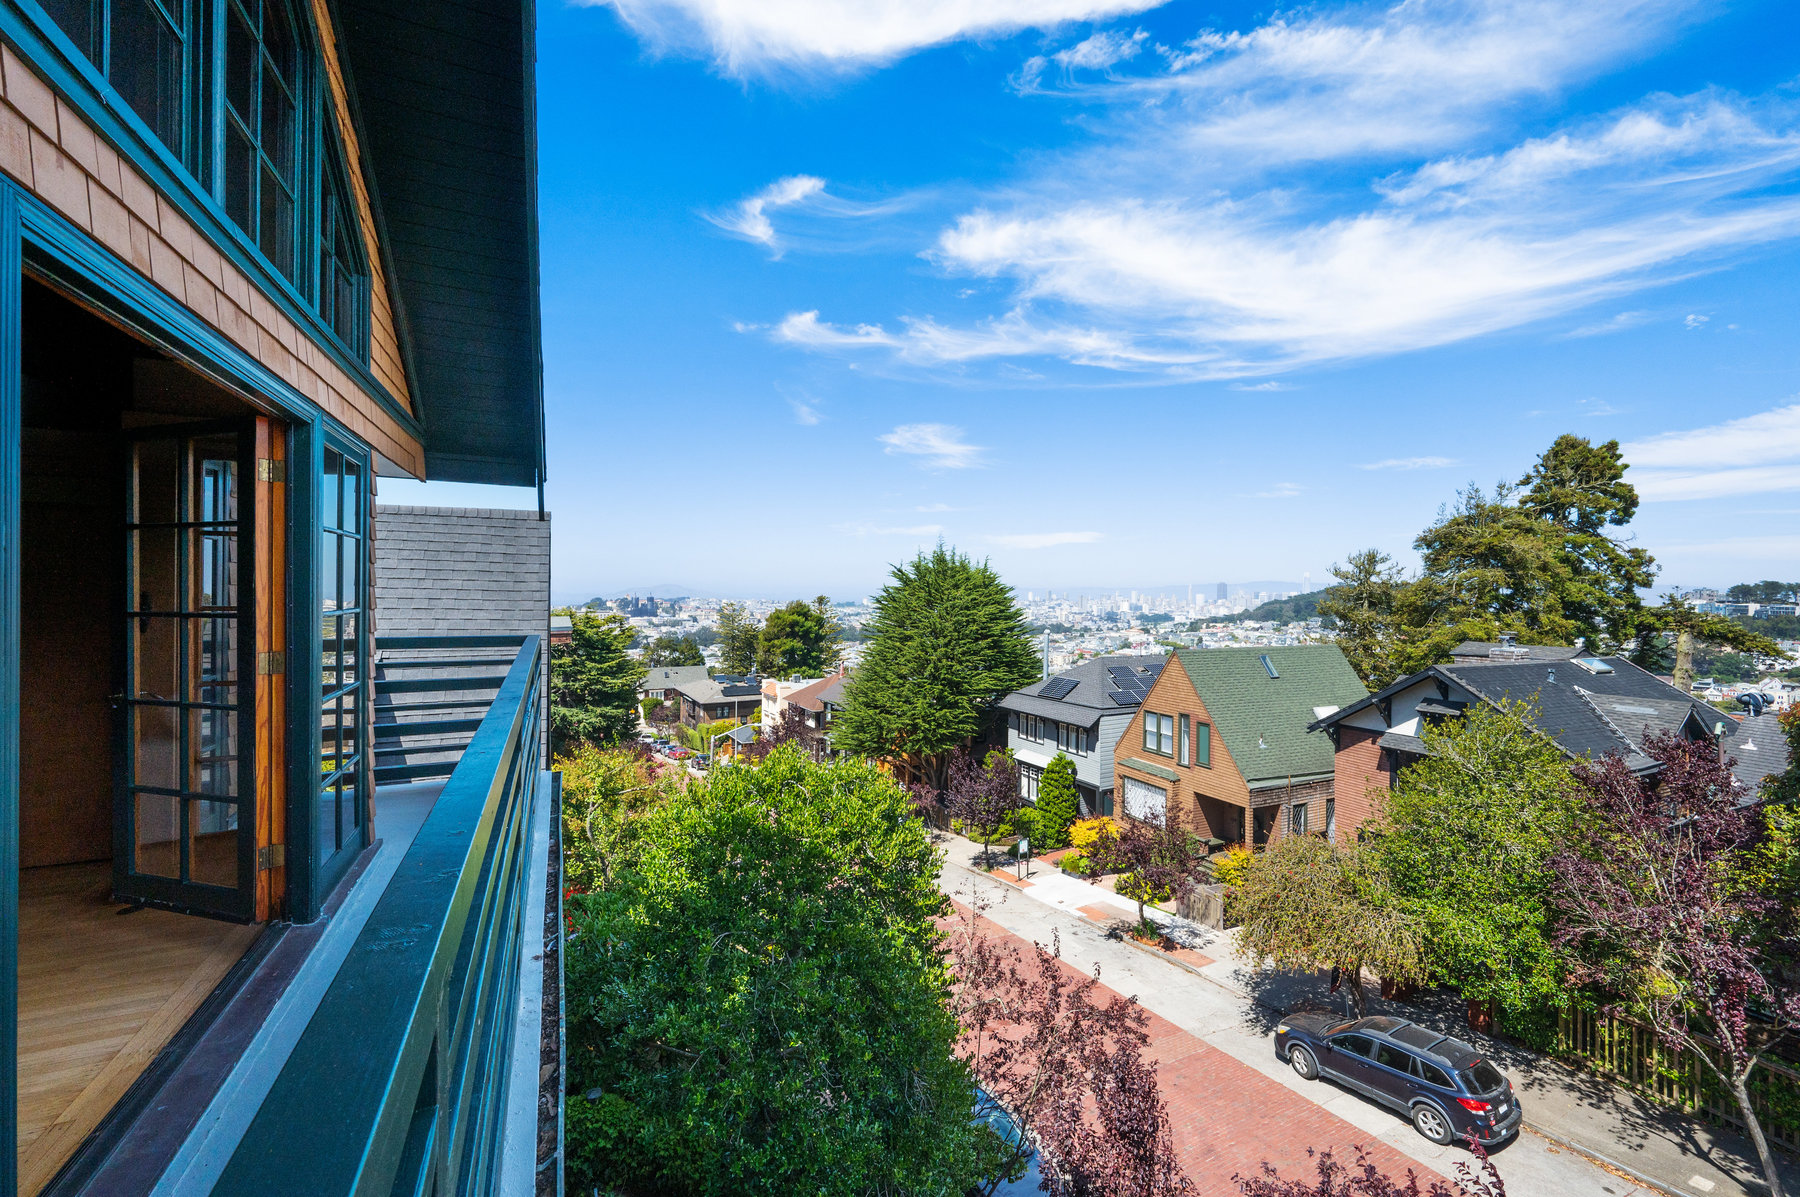 Property Photo: View from the upper balcony looking over Edgewood Ave and San Francisco Bay beyond